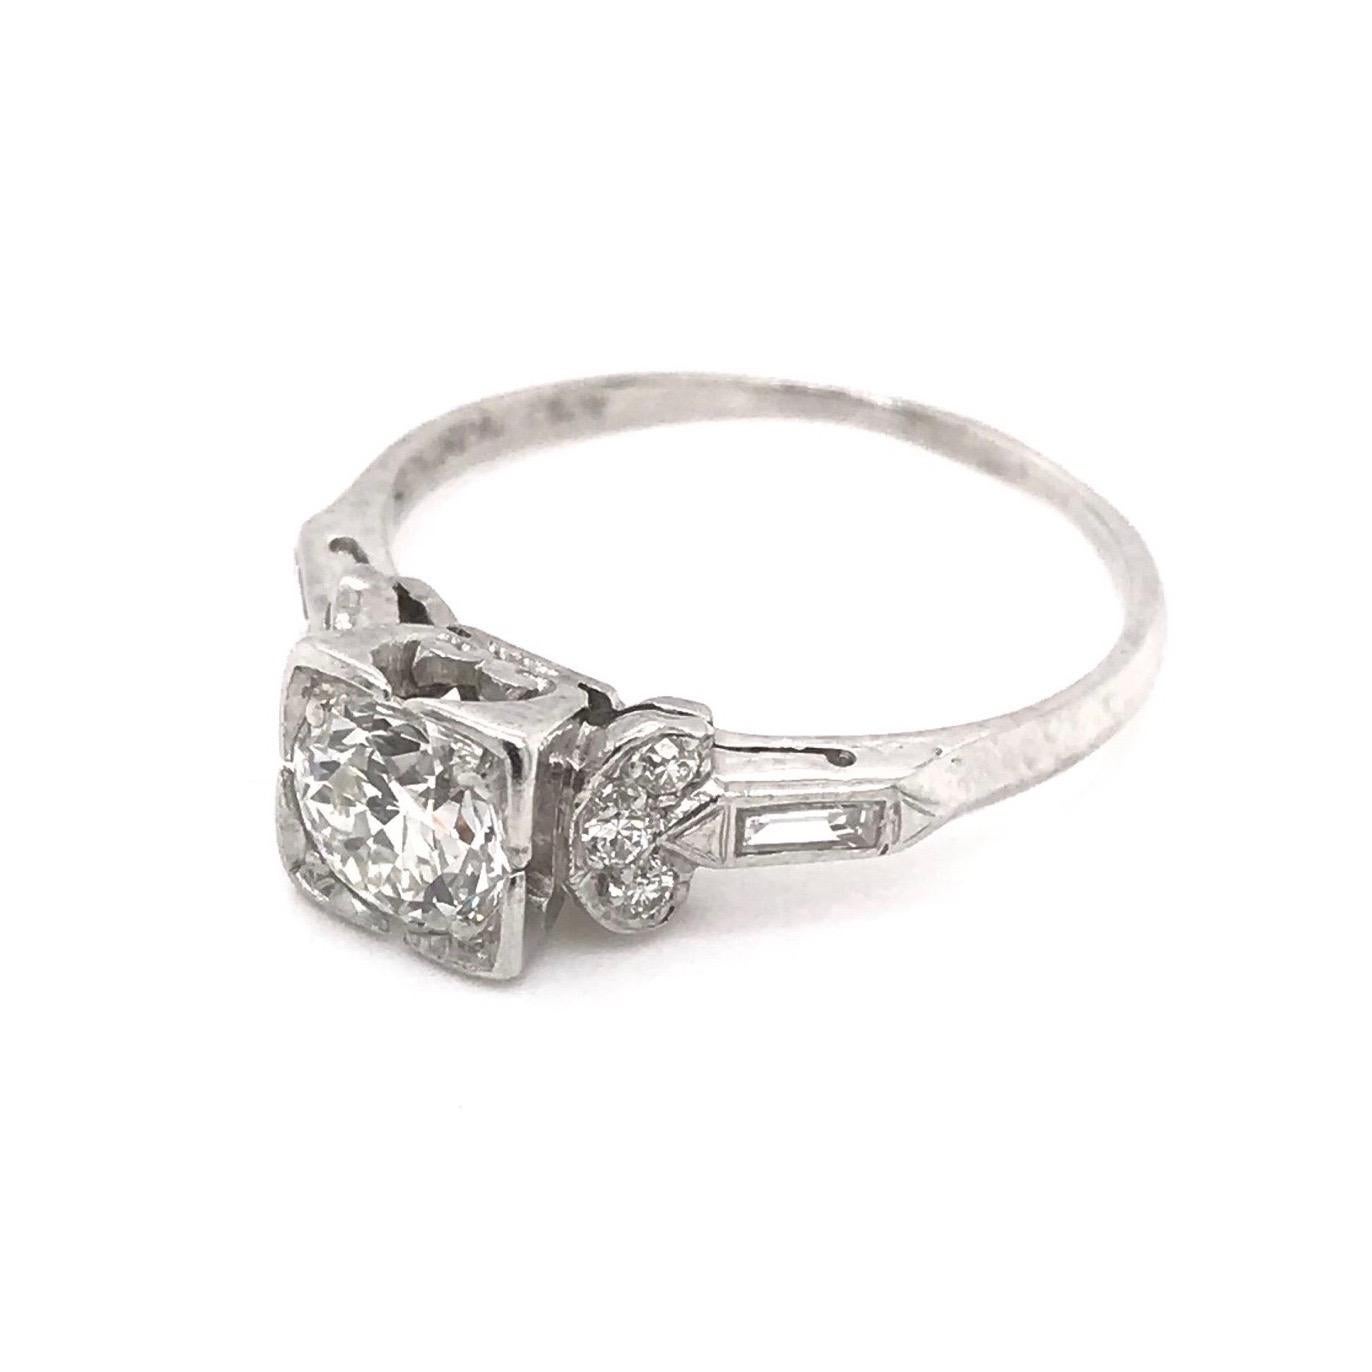 This ring was handcrafted sometime during the Art Deco design period ( 1920-1940 ). The setting is platinum and features a center diamond measuring approximately 0.75 carats. The center Old European Cut diamond grades approximately J in color, VS2